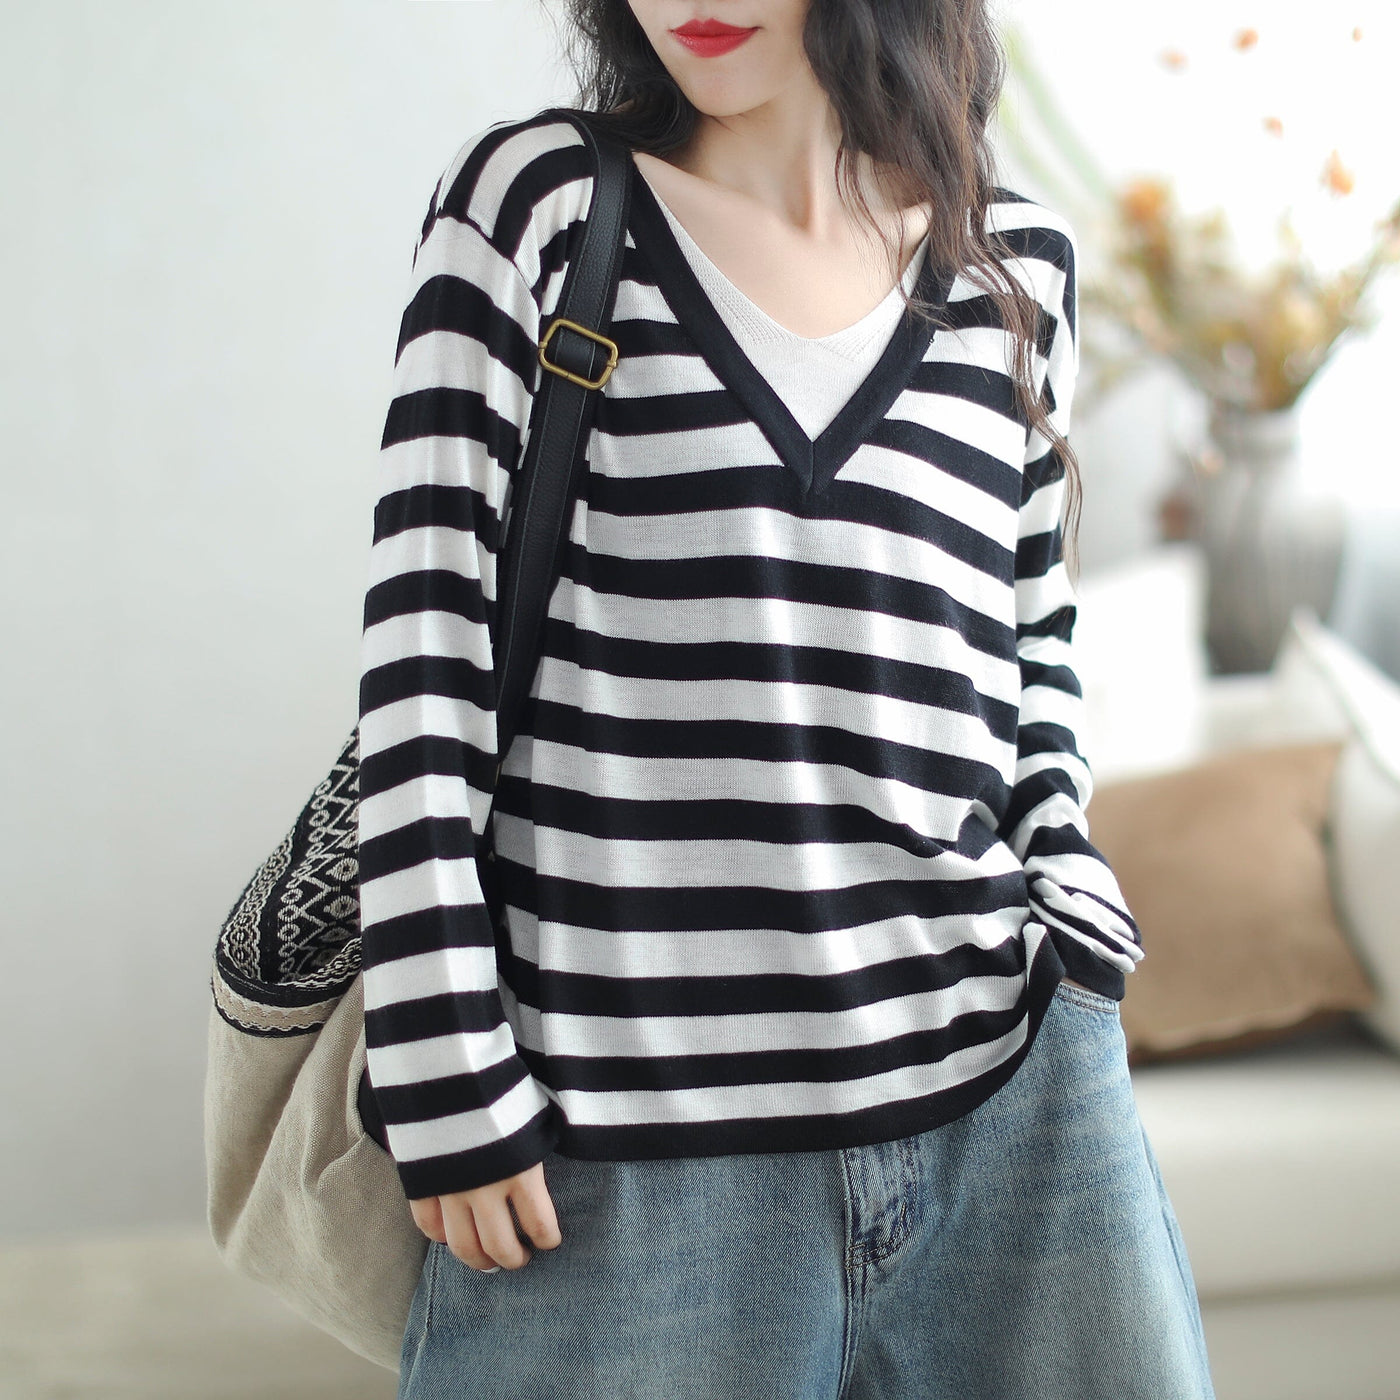 Women Loose Casual Fashion Stripe Knitted Top